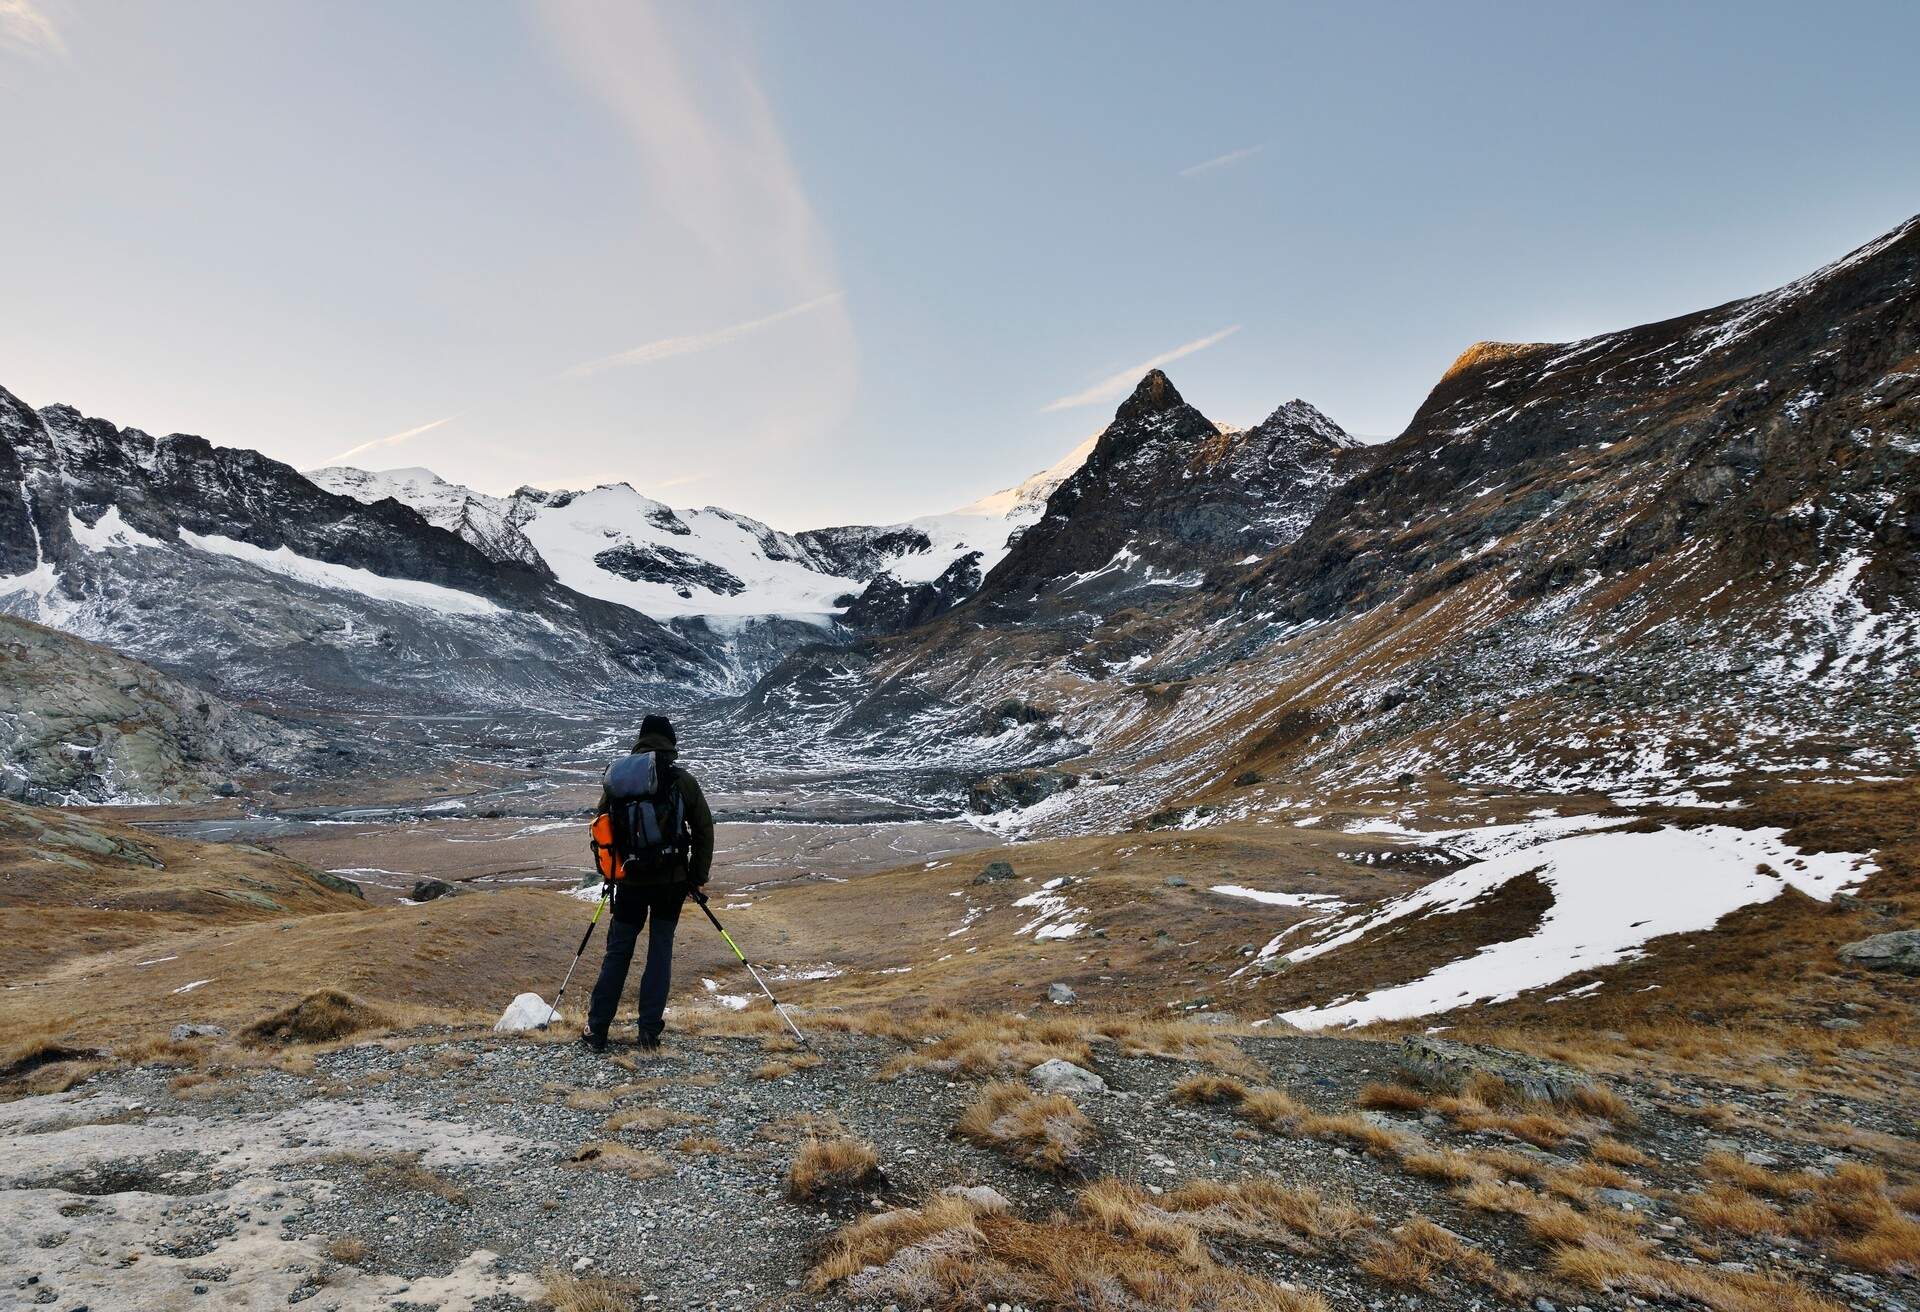 A hiker standing on a dry terrain, looking at a sparsely snow-covered mountain range.